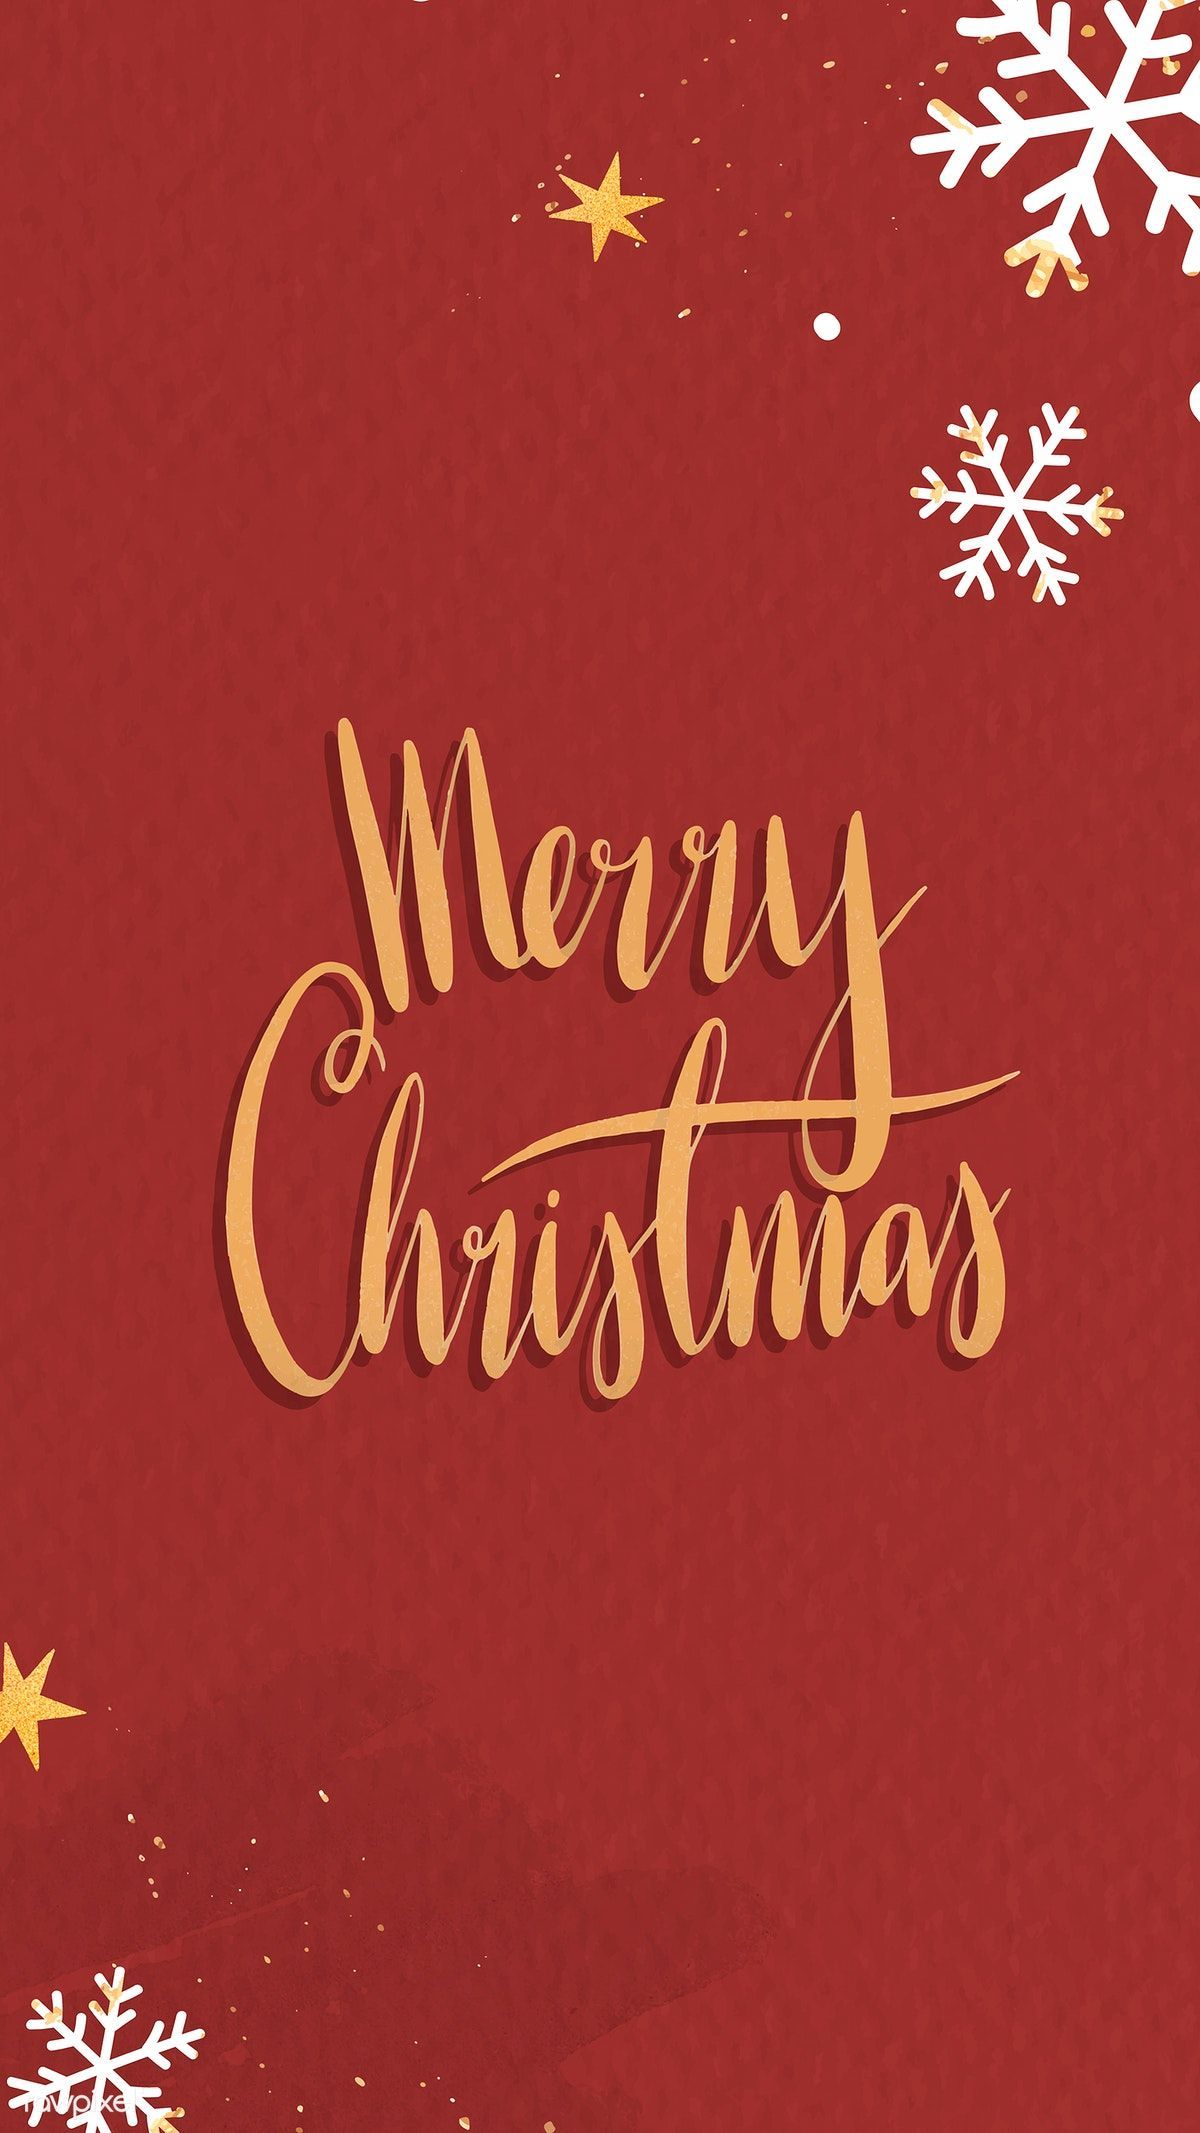 Gold Merry Christmas on red mobile phone wallpaper vector. premium image by raw. Wallpaper iphone christmas, Merry christmas background, Cute christmas wallpaper